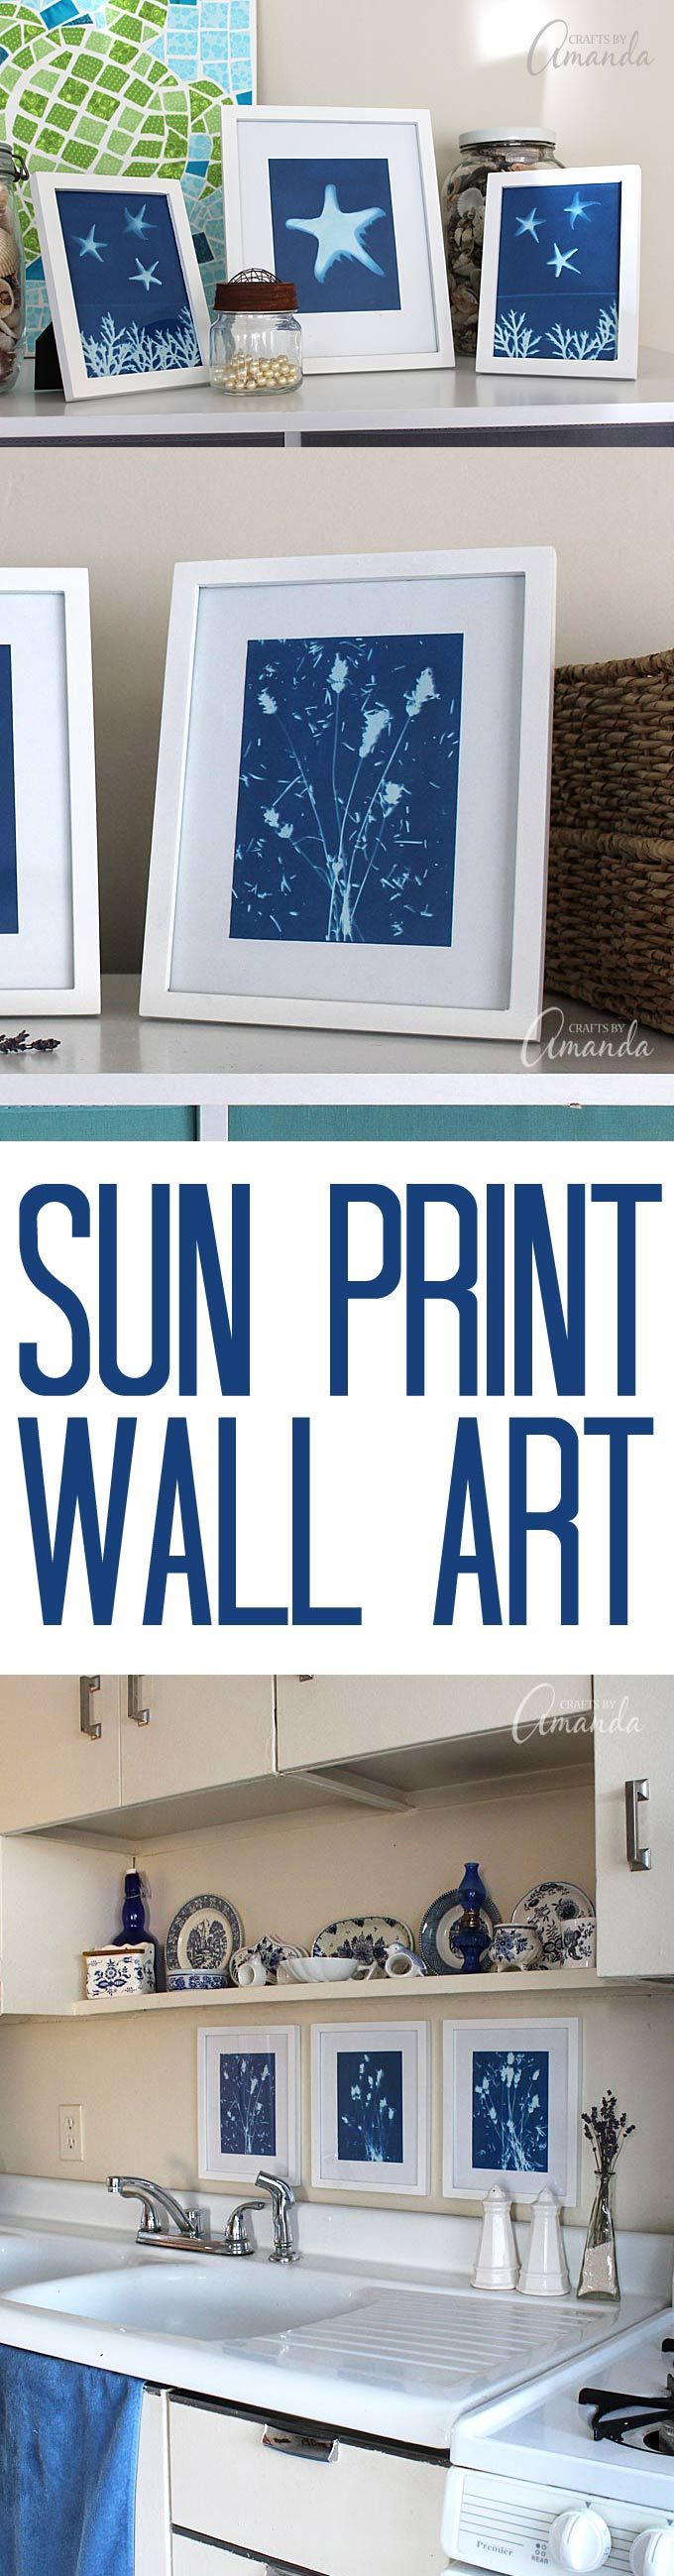 Use sun print paper to create wonderful wall art! This is an awesome project for...